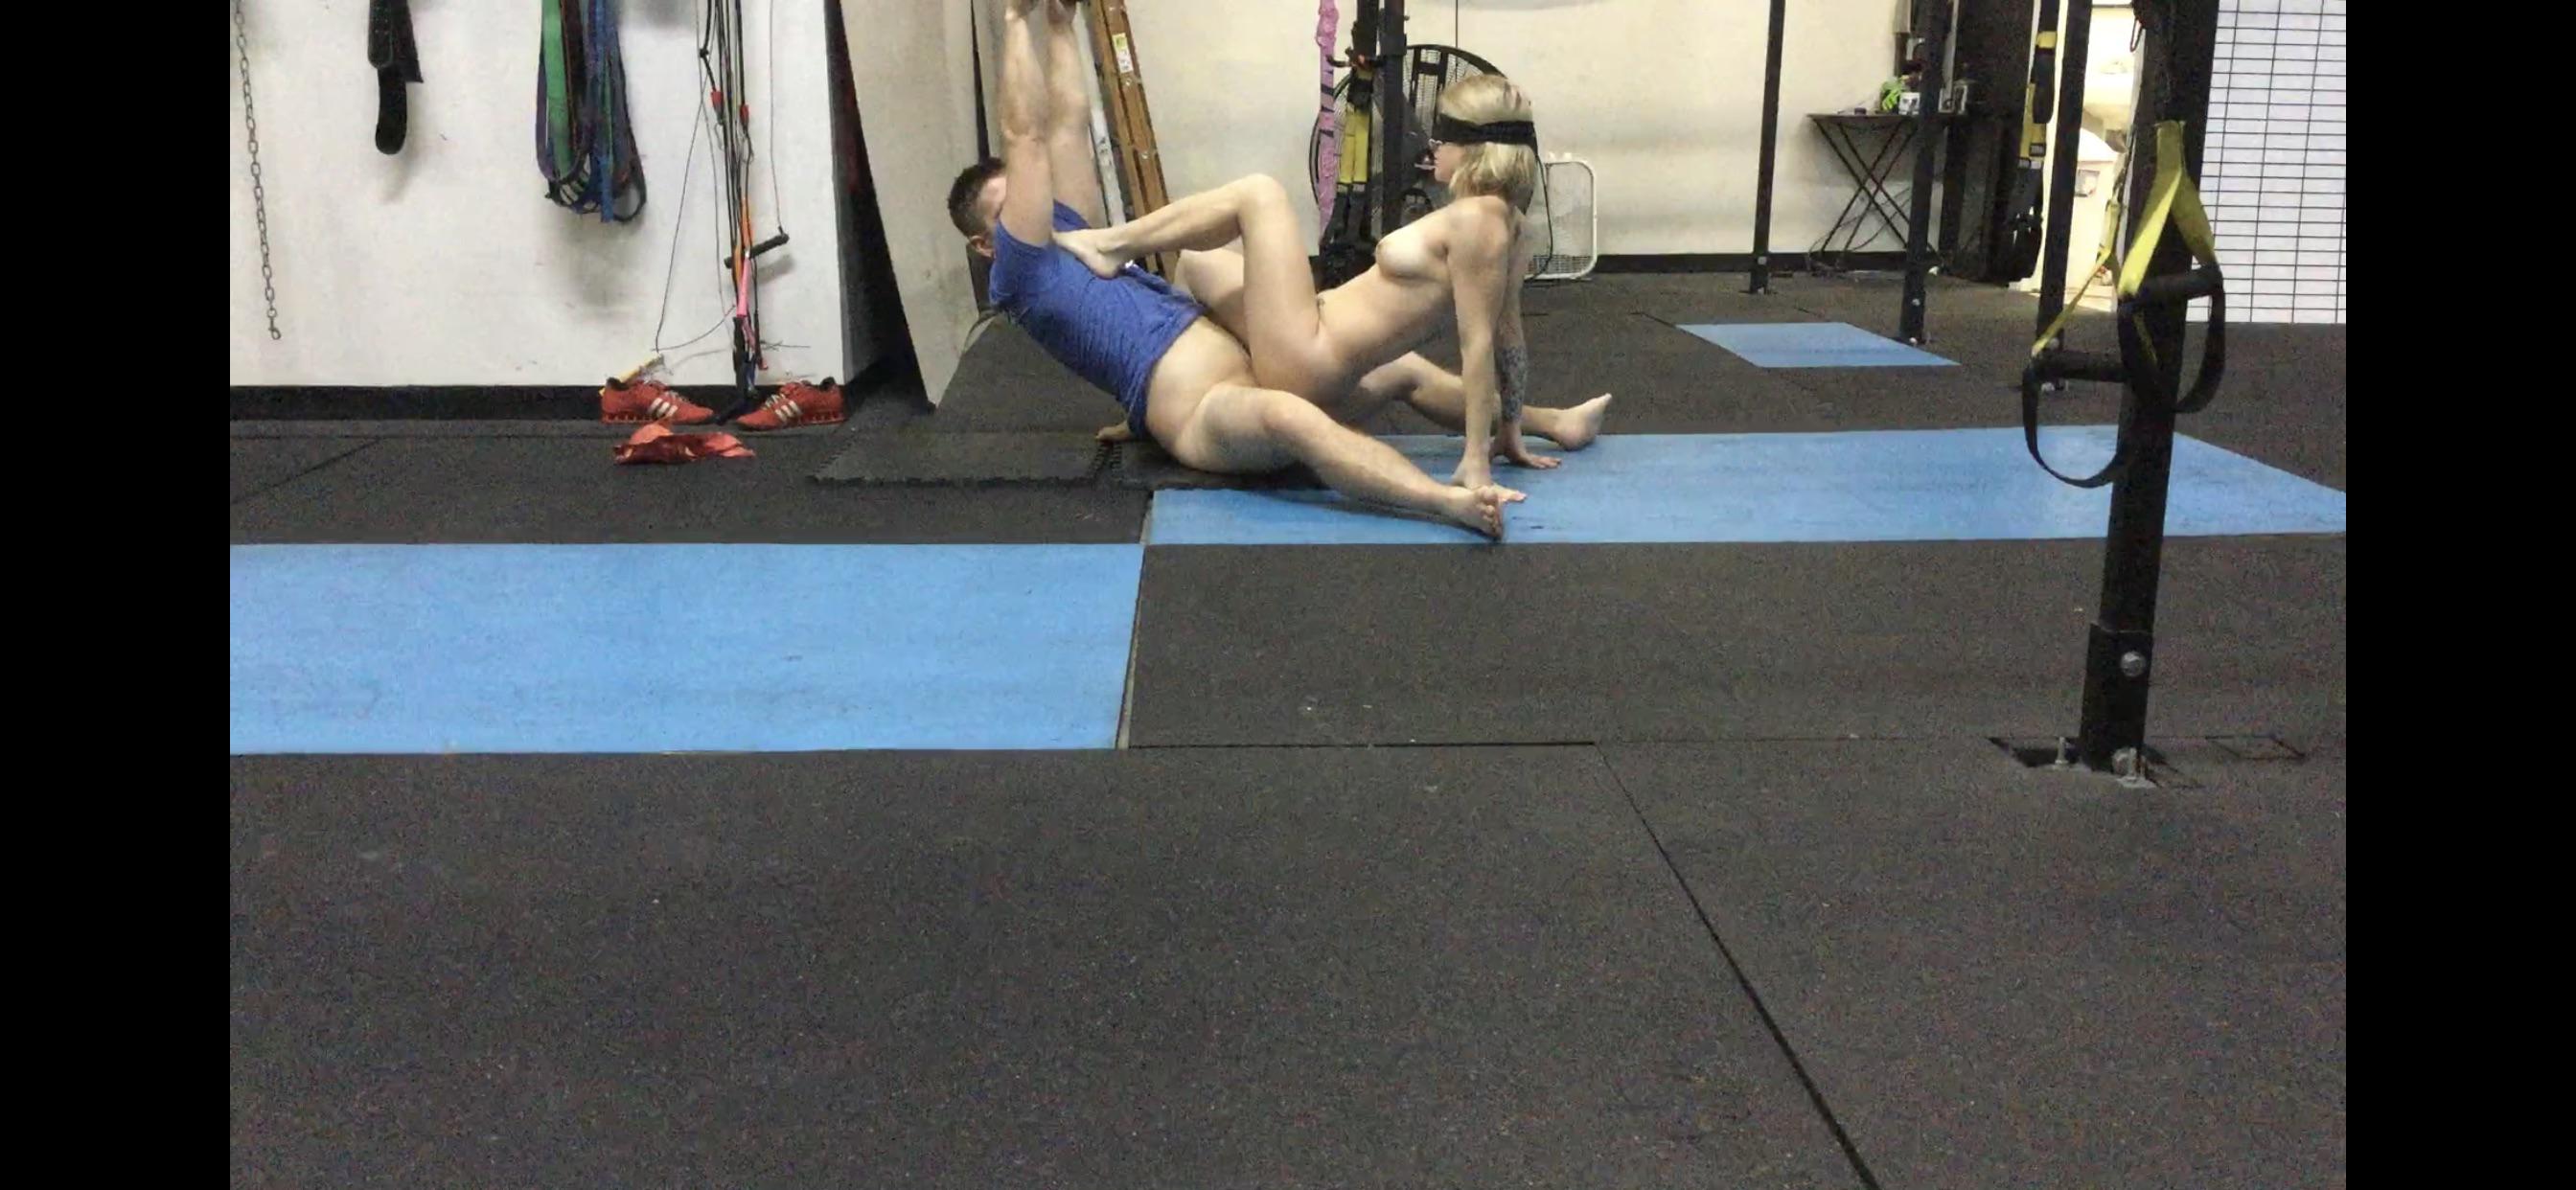 Fucking my trainer while he hangs from the rings (trying to download the video if there’s enough interest) (f38)